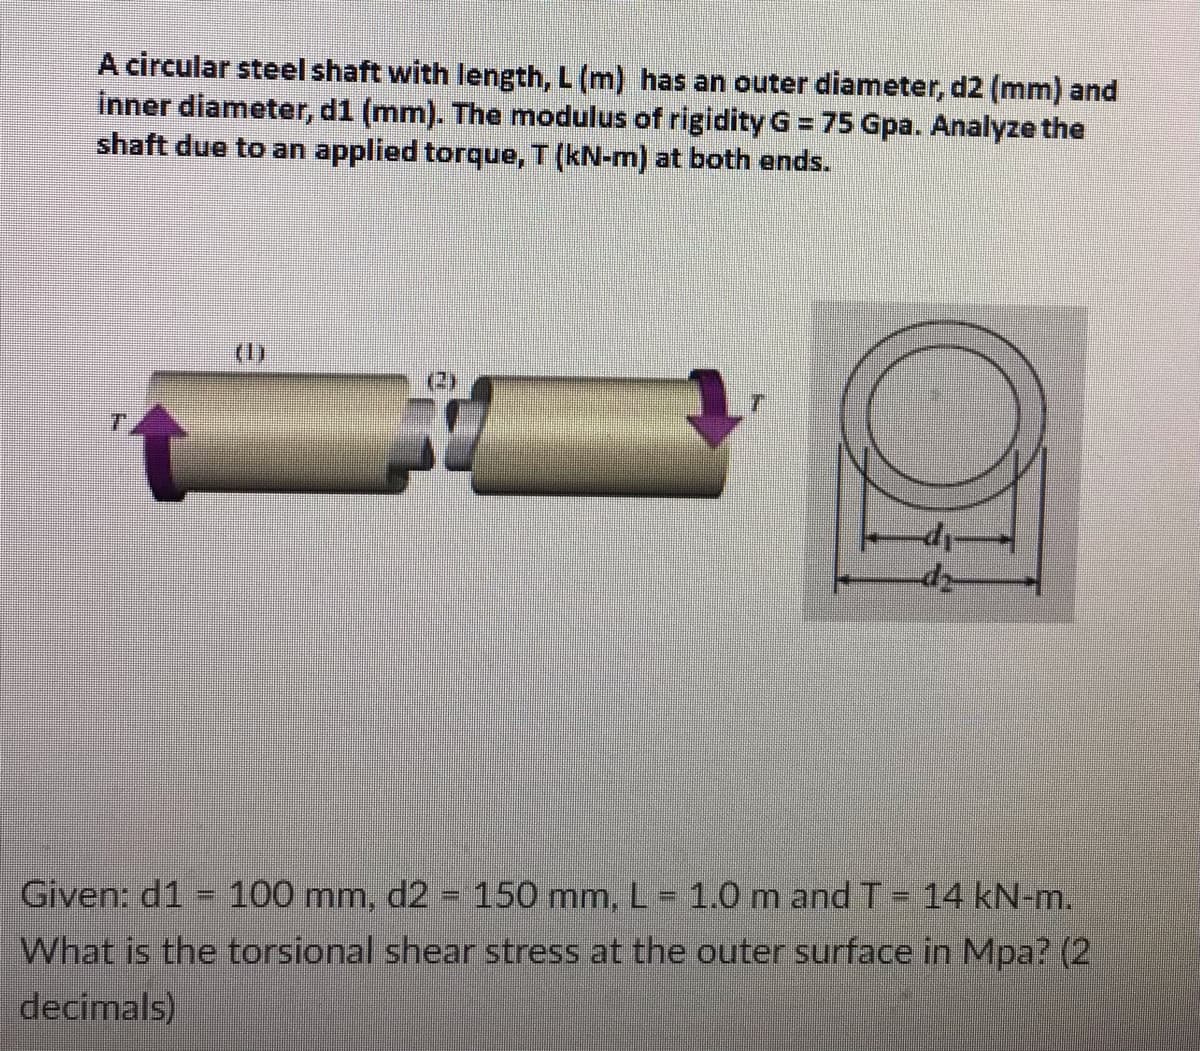 A circular steel shaft with length, L (m) has an outer diameter, d2 (mm) and
inner diameter, d1 (mm). The modulus of rigidity G = 75 Gpa. Analyze the
shaft due to an applied torque, T (kN-m) at both ends.
T
39
Given: d1 = 100 mm, d2 = 150 mm, L = 1.0 m and T = 14 kN-m.
What is the torsional shear stress at the outer surface in Mpa? (2)
decimals)